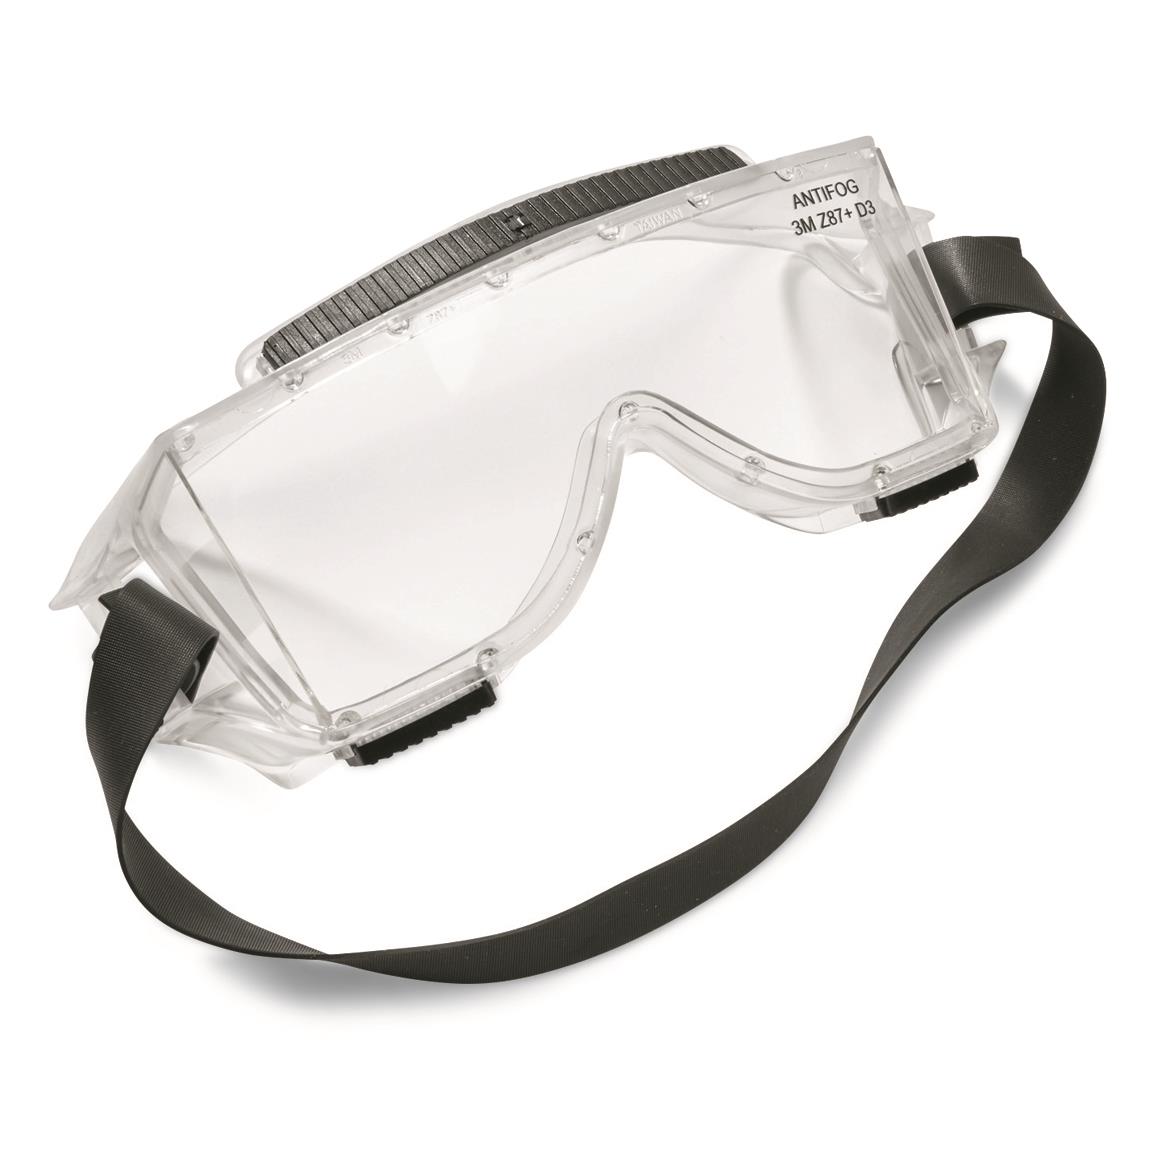 U.S. Military Surplus 3M Safety Goggles, 2 Pack, New